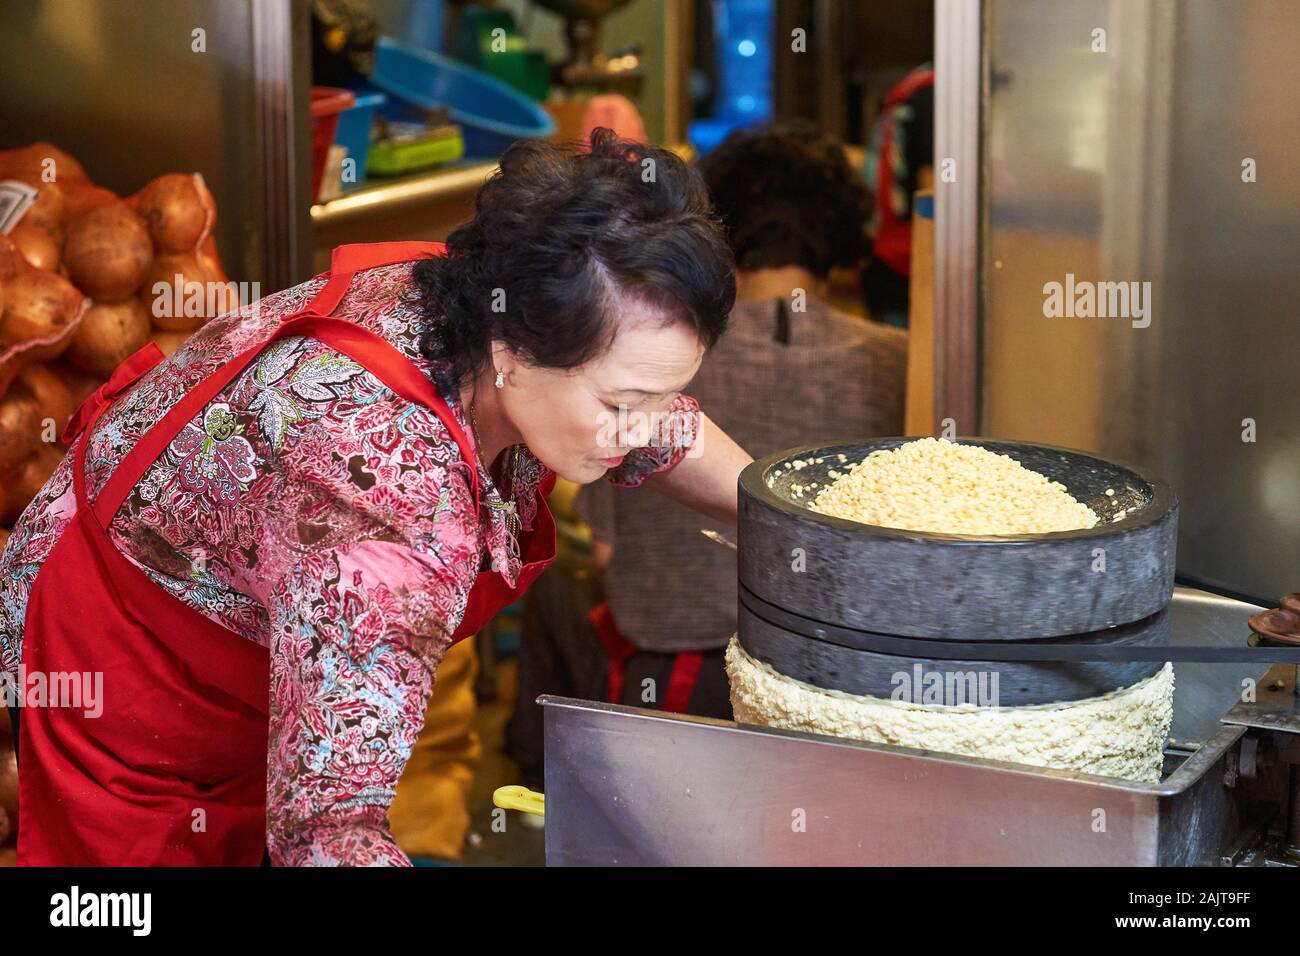 A Korean woman in red apron uses a special grinder to prepare mung beans for use in mung bean pancakes (bindae-tteok or bindaetteok) at Gwangjang Mkt. Stock Photo